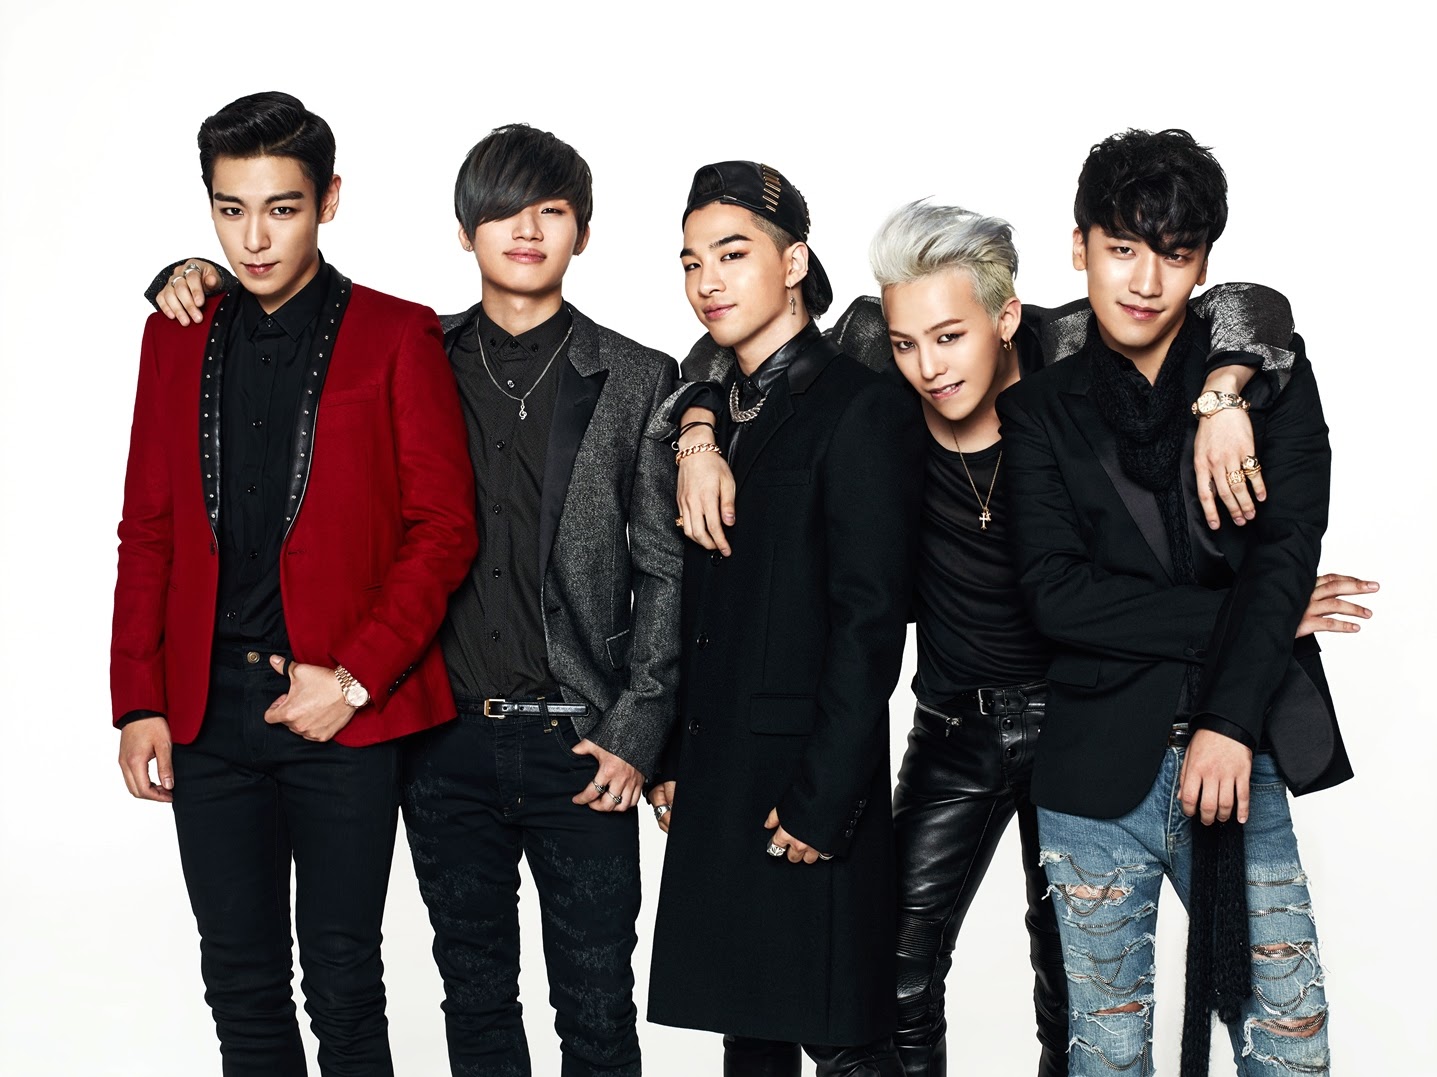 BIGBANG's "Fantastic Baby" Is Featured in New "Pitch Perfect 2" Trailer | Soompi